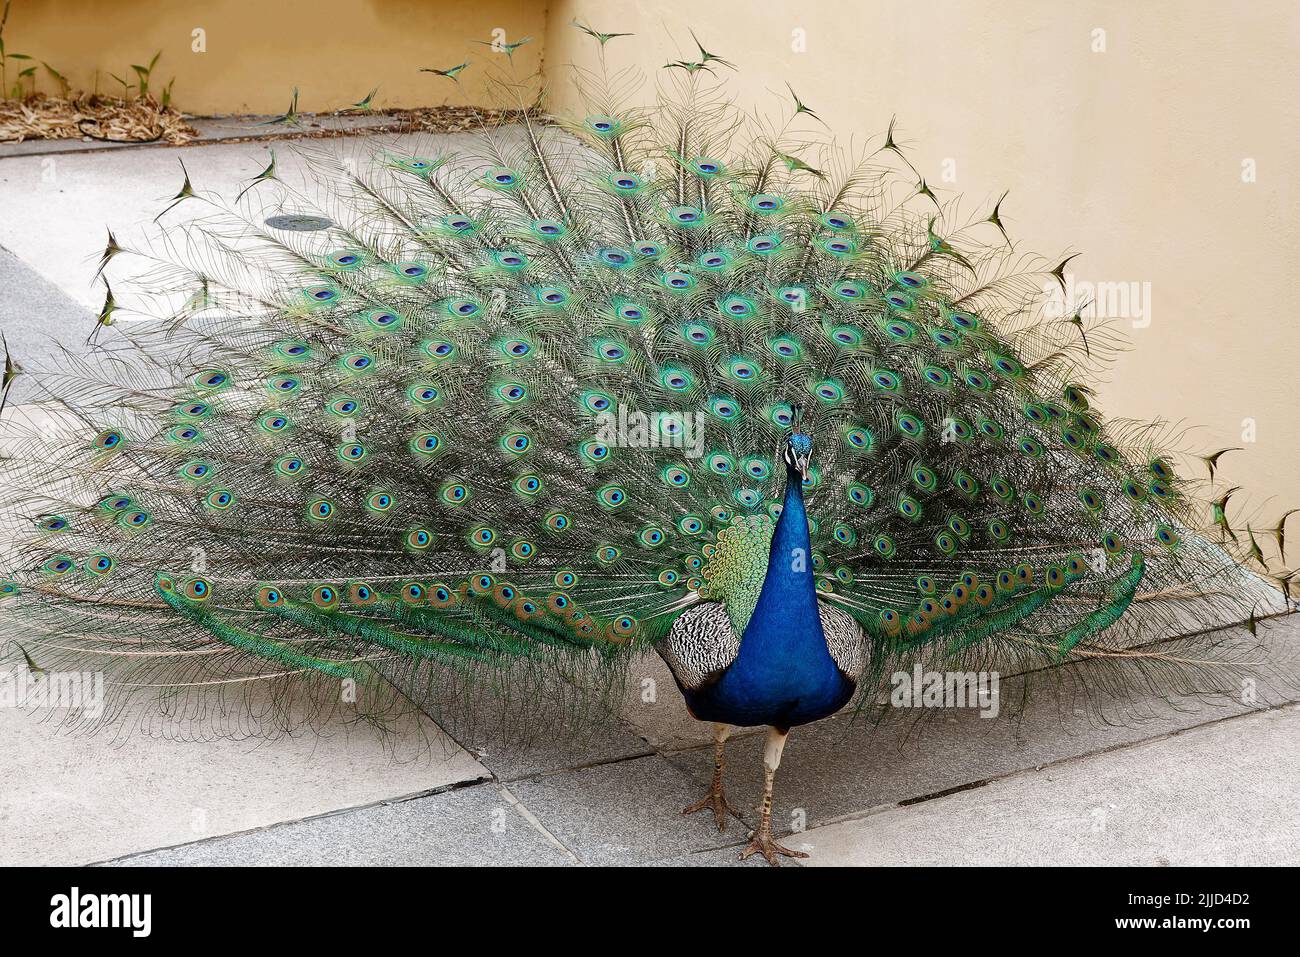 peacock portrait, tail feathers spread partially in large fan, walking, close-up, colorful bird, Indian peafowl, Seward Johnson Center for the Arts; G Stock Photo